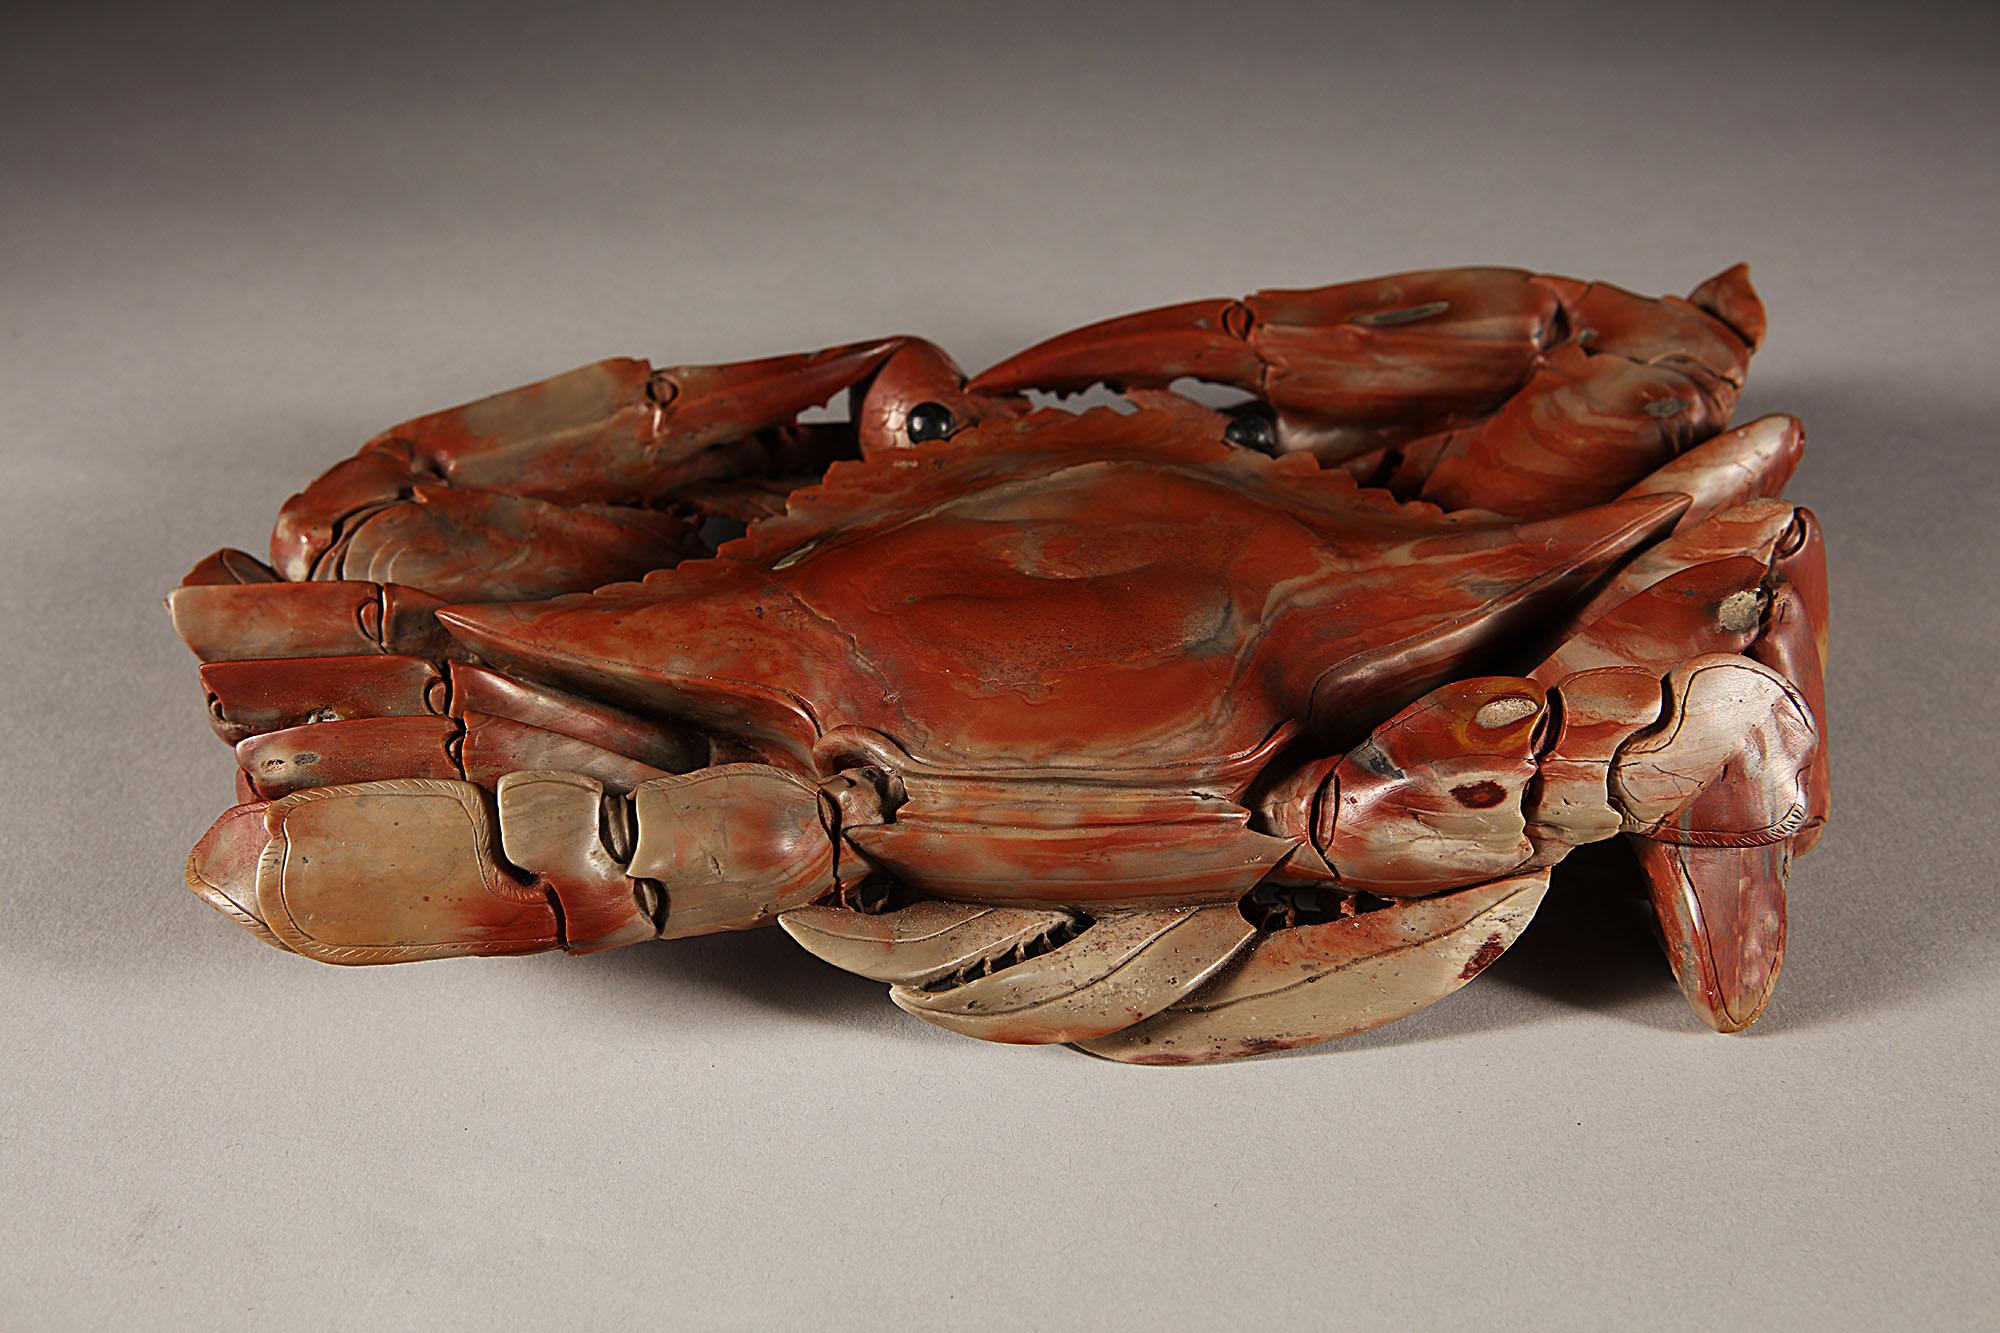 Carved Mid-19th Century Chinese Red Soapstone Model of a Crab